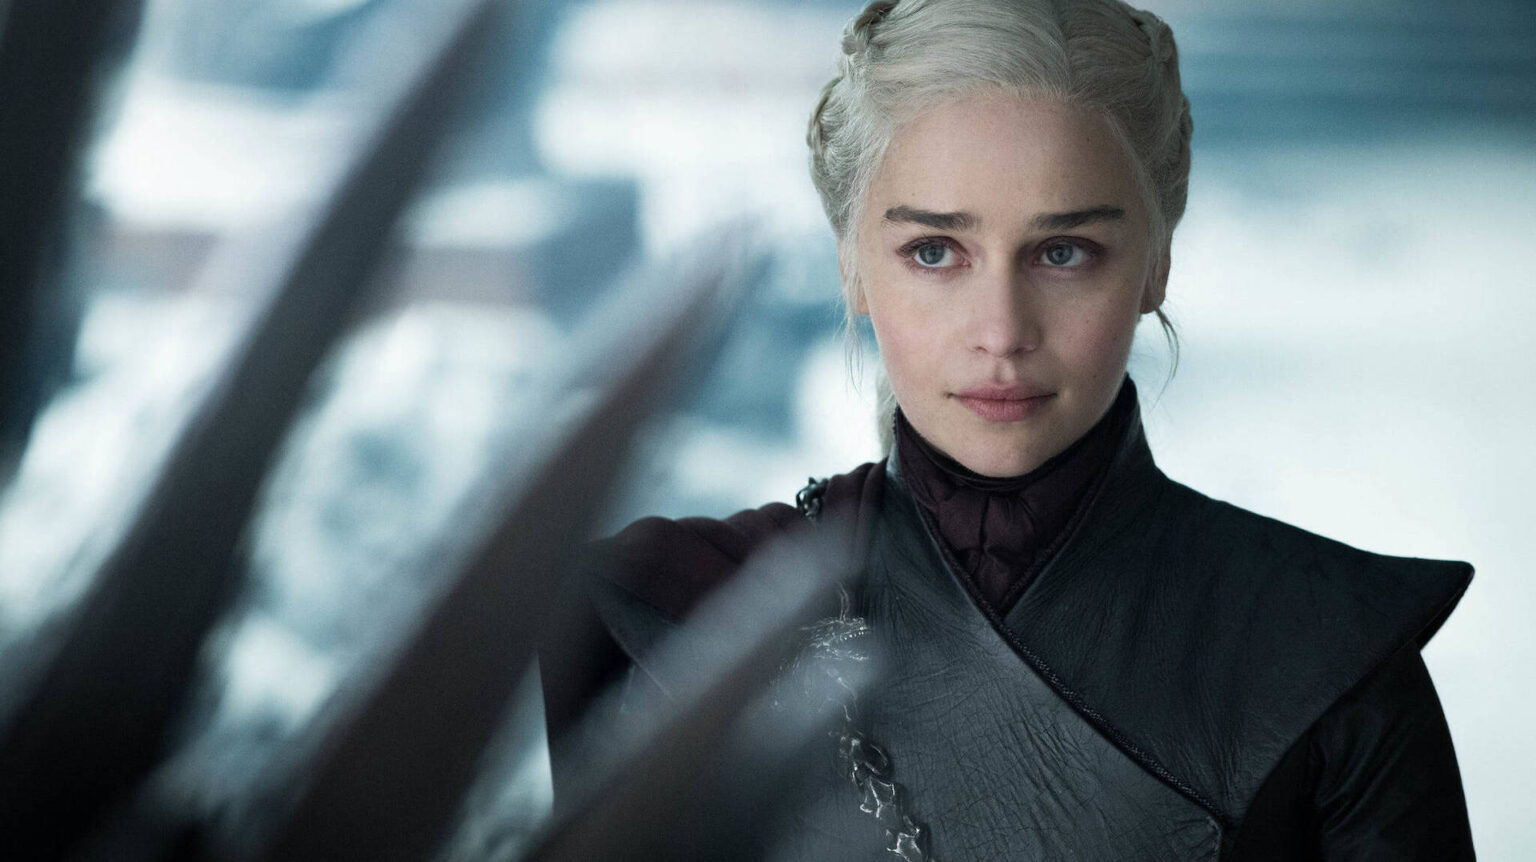 Emilia Clarke is a talented actress known for her role in 'Game of Thrones'. But does she regrets any of the sex scenes she performed?